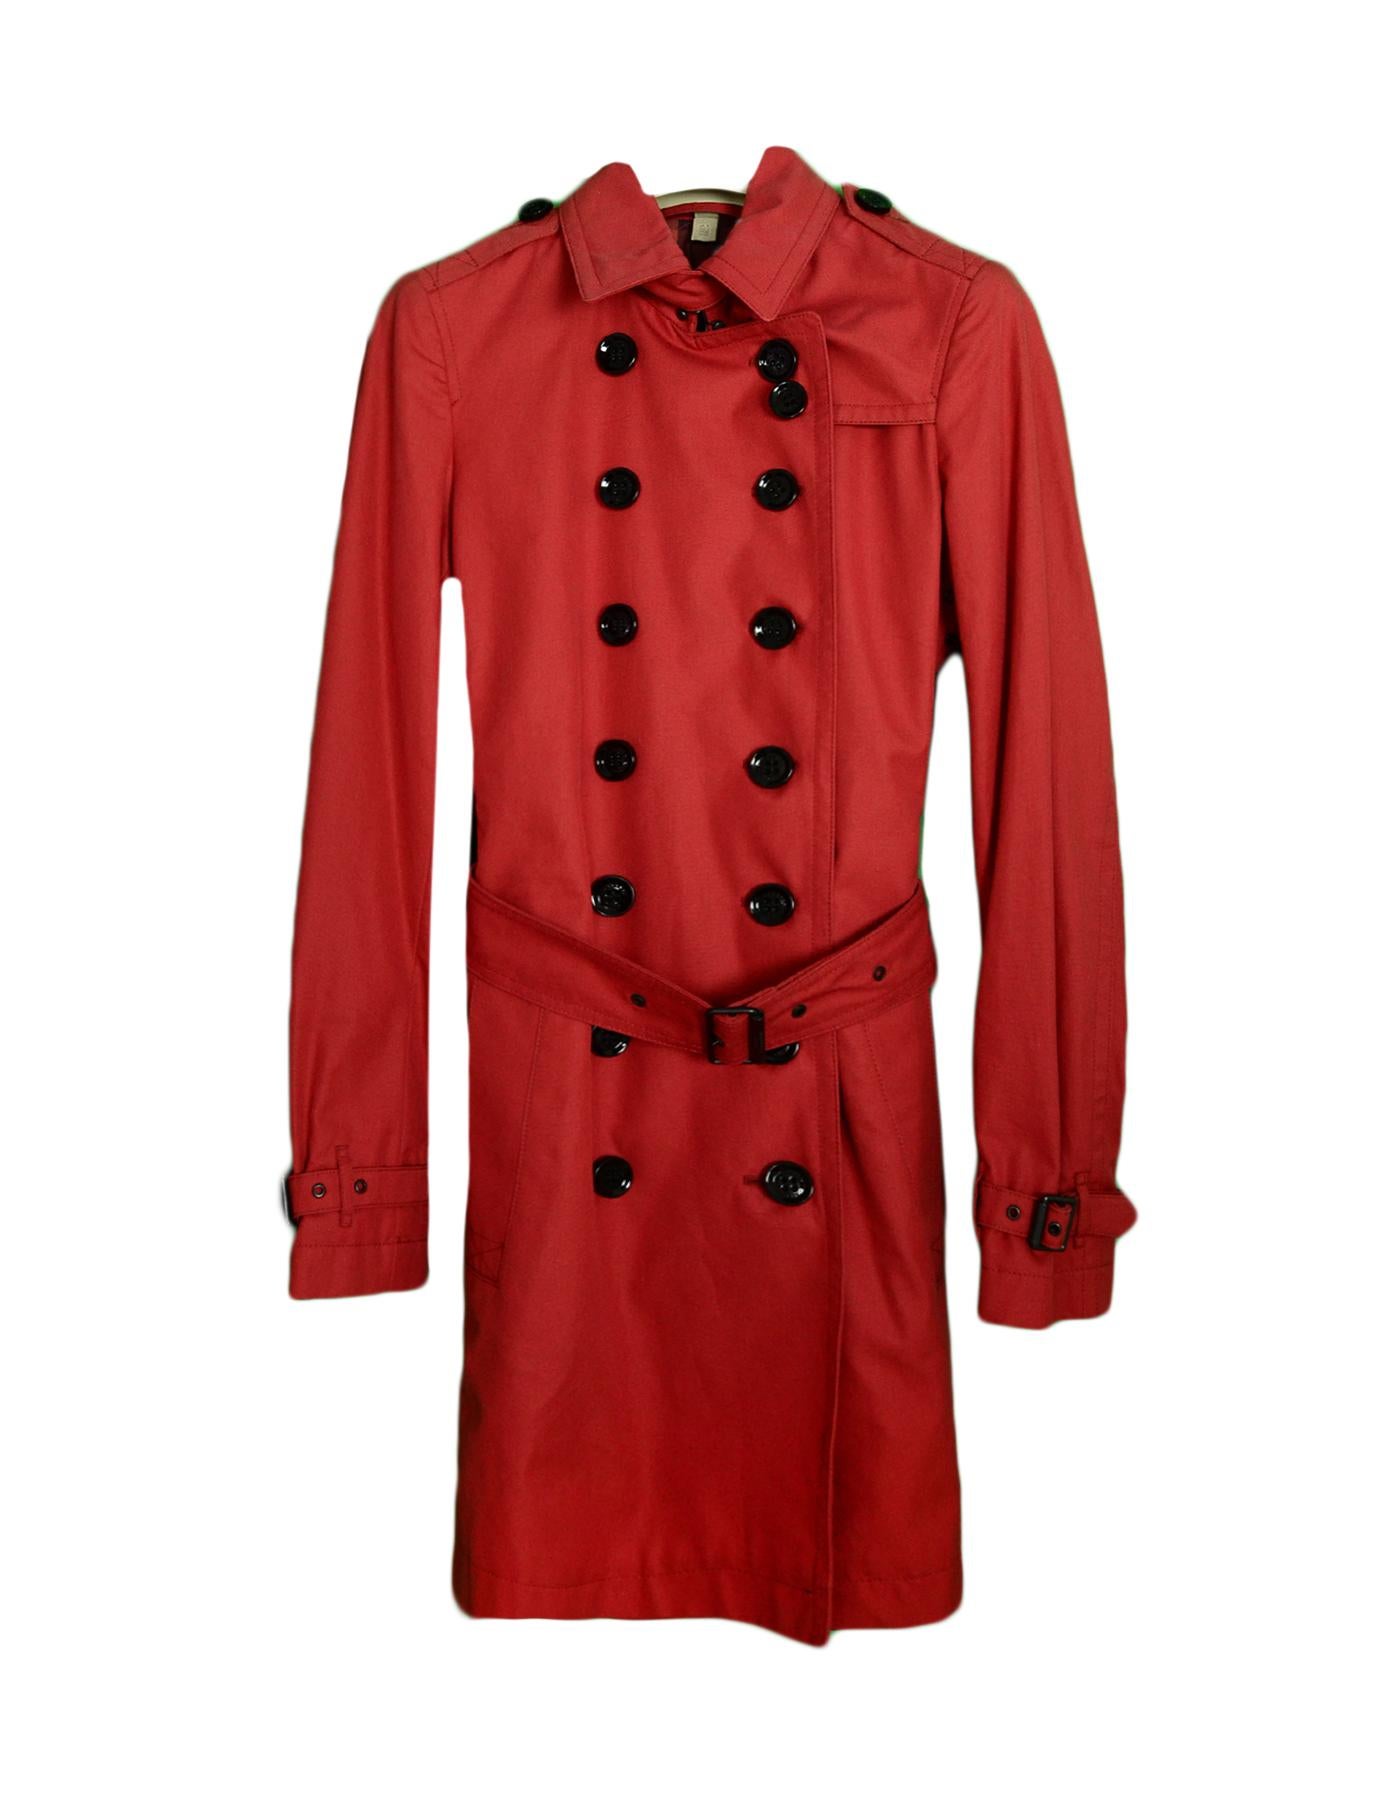 Burberry Brit Burnt Orange Trench Coat w Belt sz 2

Made In: Bosnia
Color: Burnt Orange
Materials: 100% Cotton
Lining: 100% Cotton
Opening/Closure: Front buttons
Overall Condition: Excellent pre-owned condition
Estimated Retail: $995 + tax
Includes: